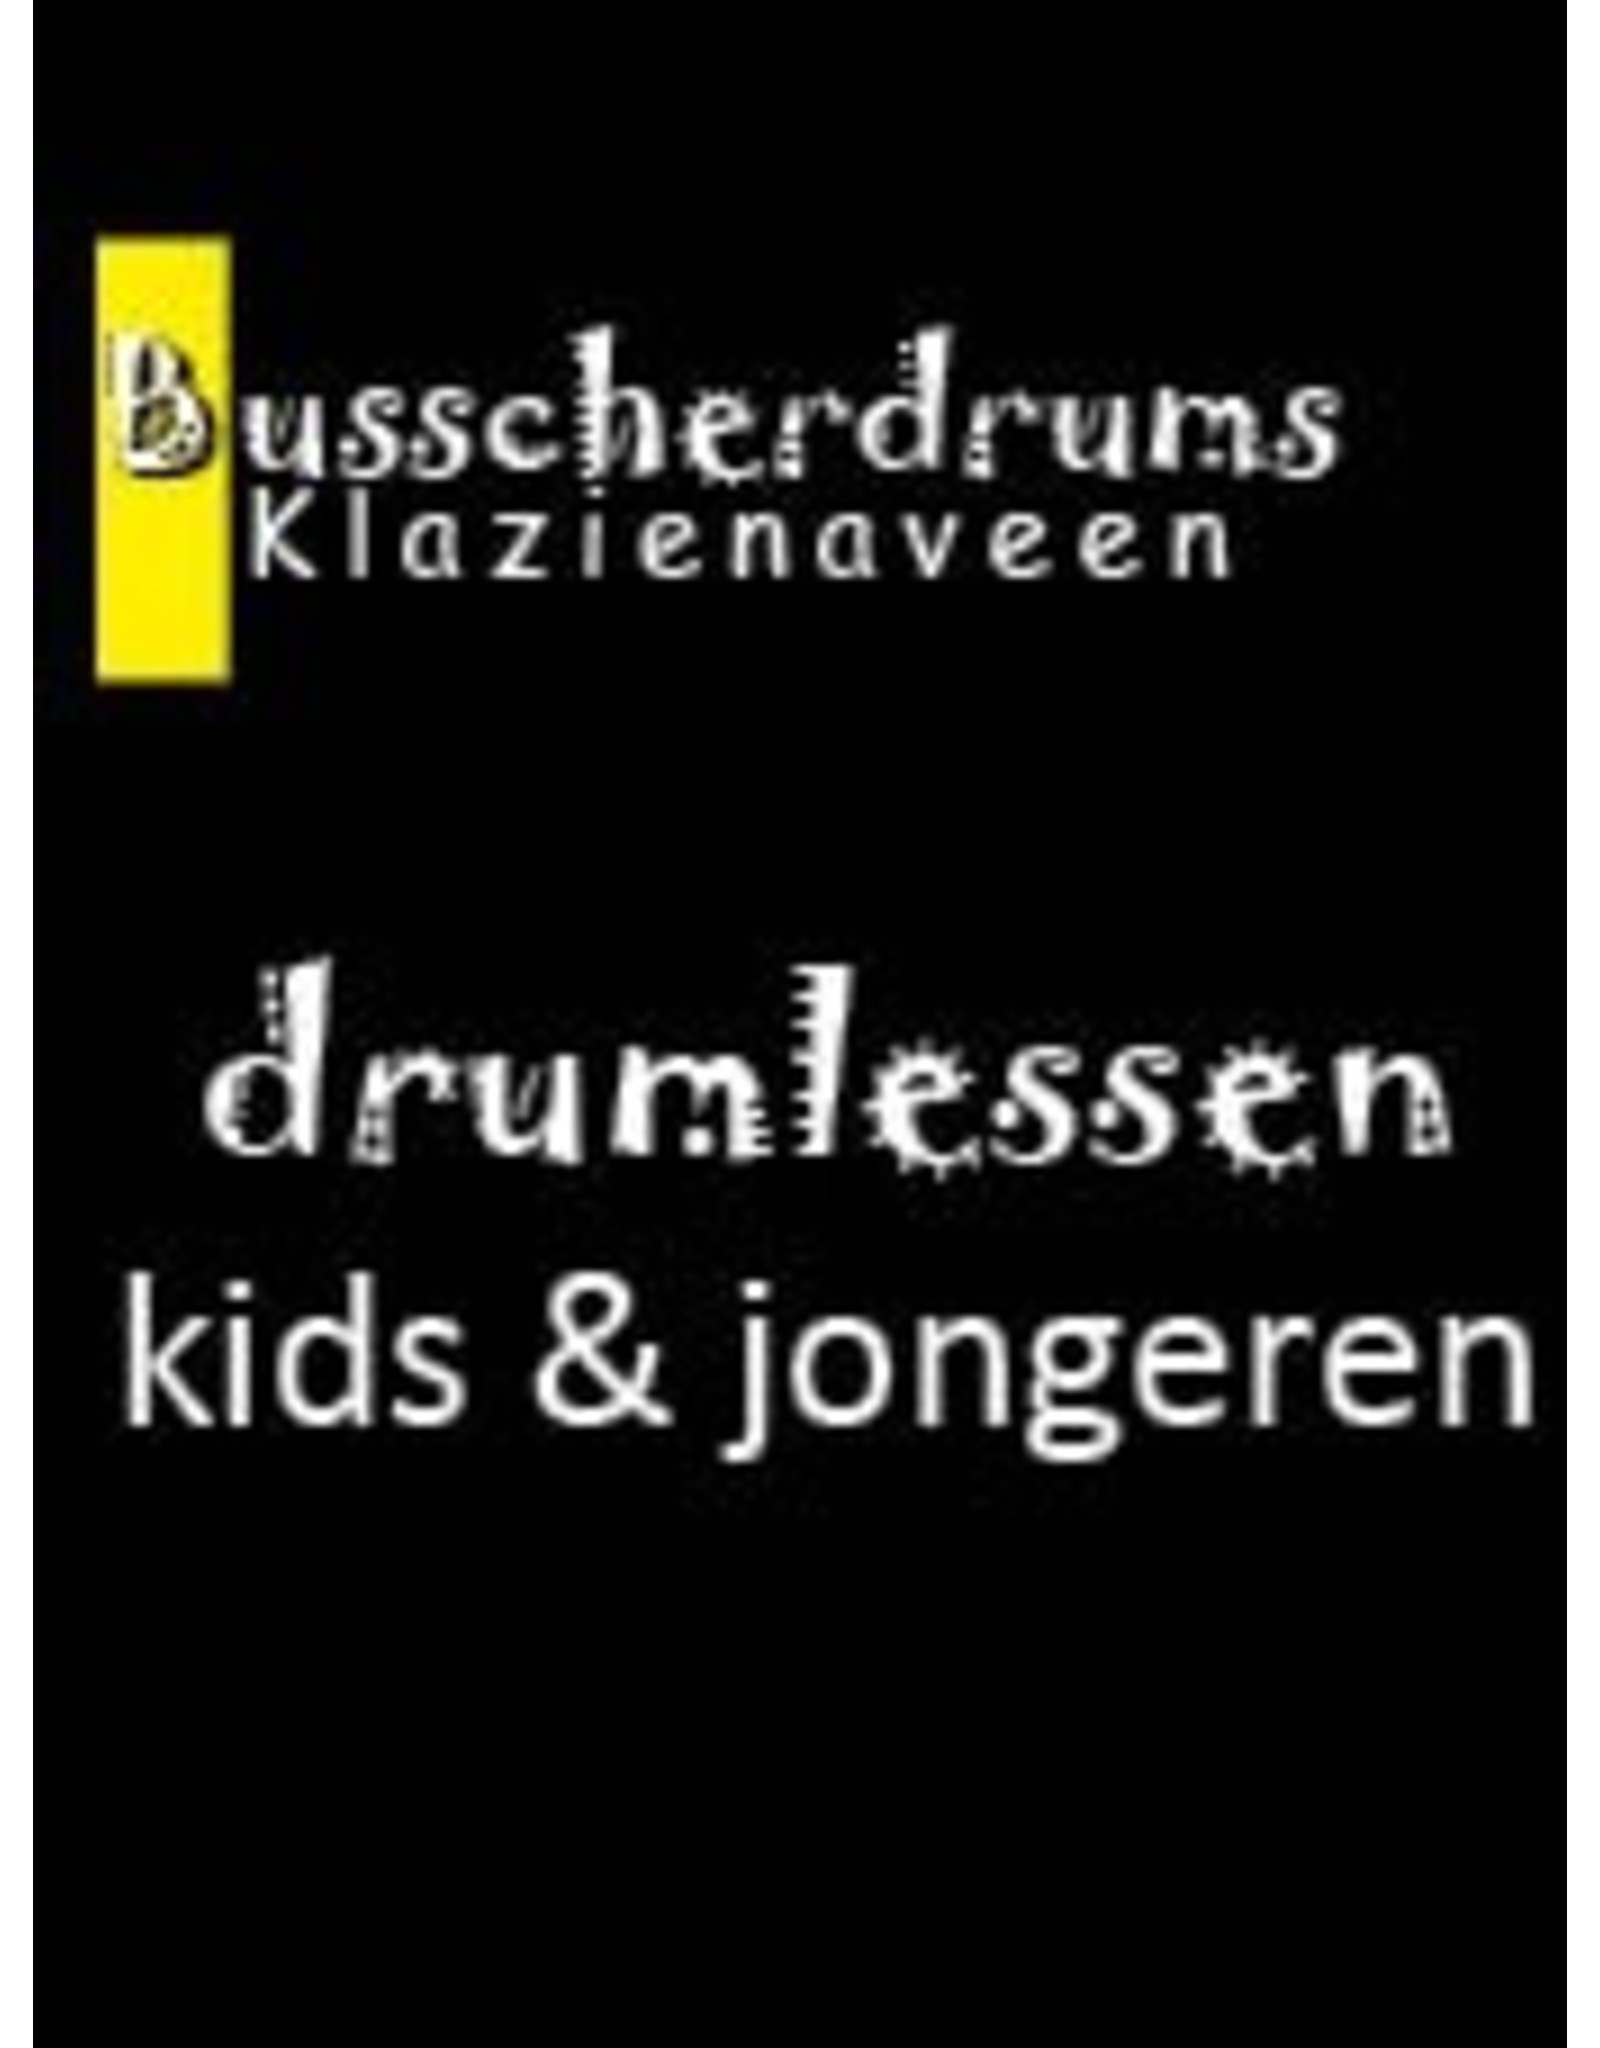 Busscherdrums Drum Lessons 30Lessenkaart 30 minutes individual drum lessons kids & youth 903